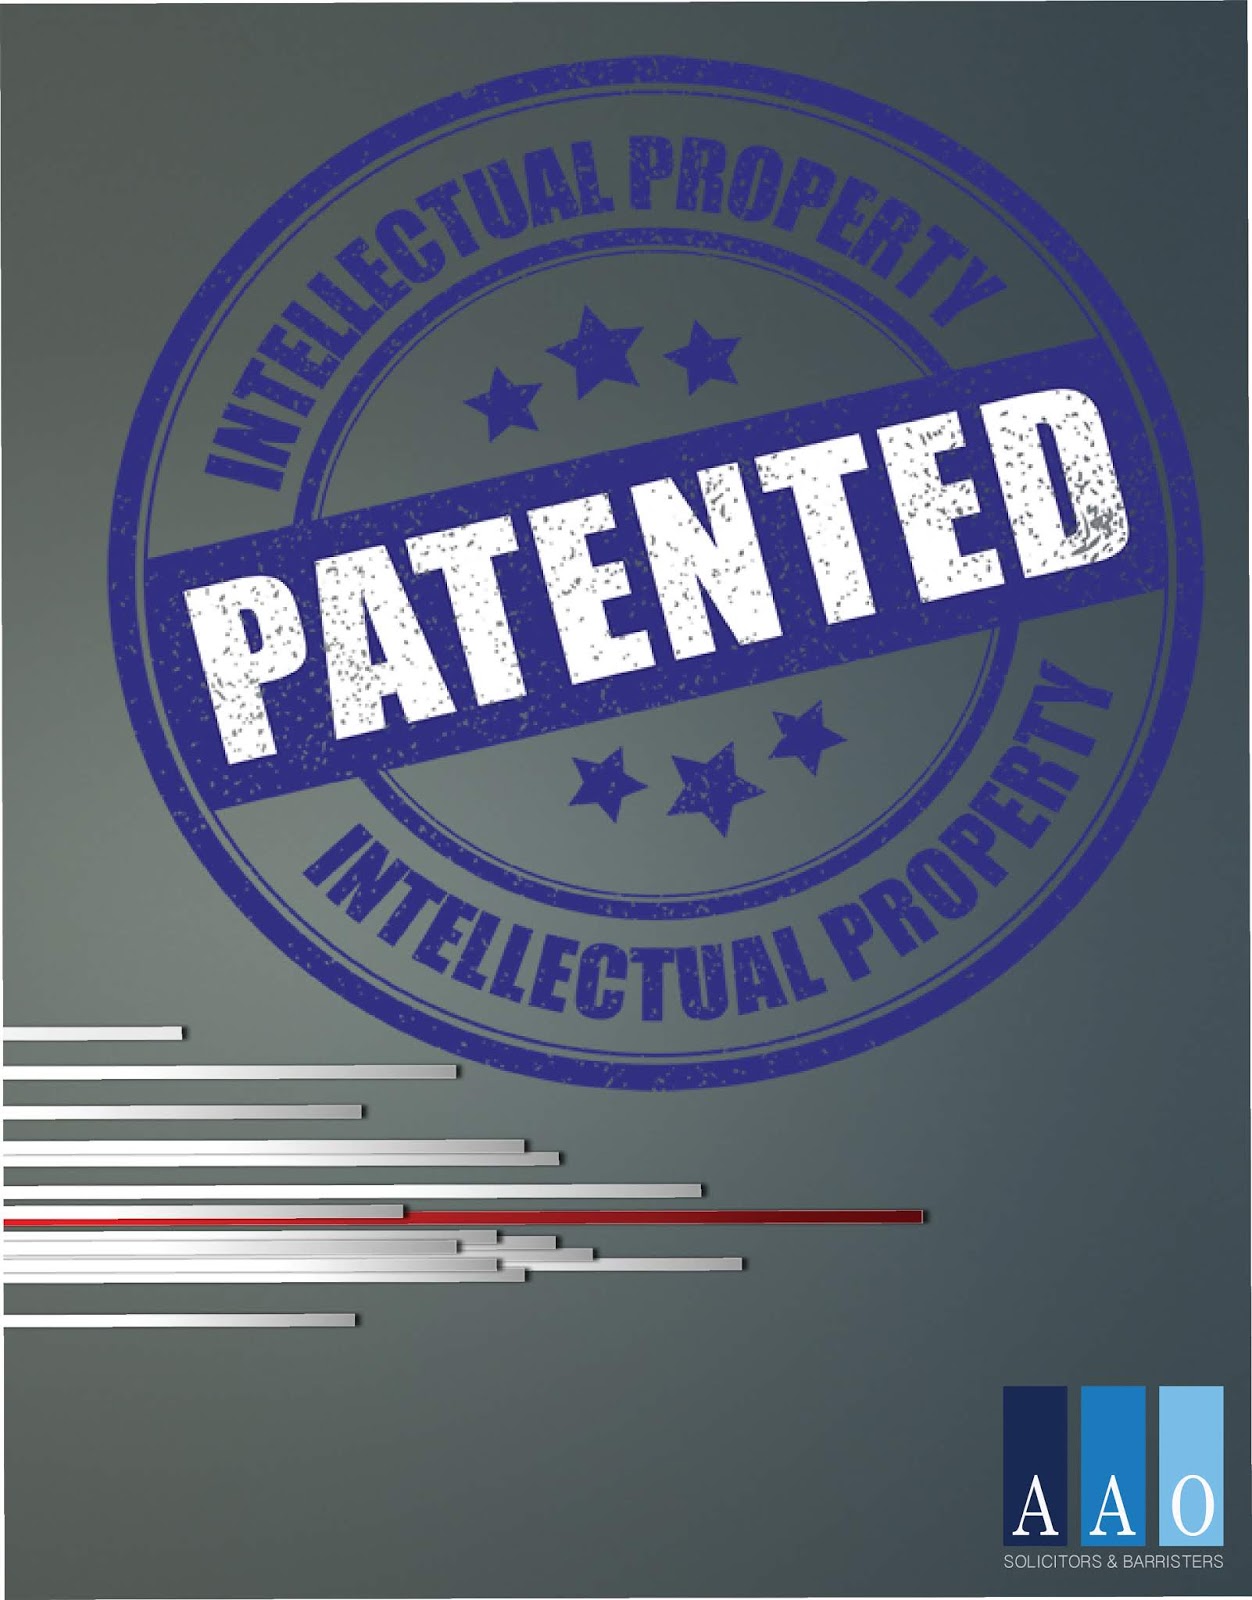 Trademark, Patents And Designs |